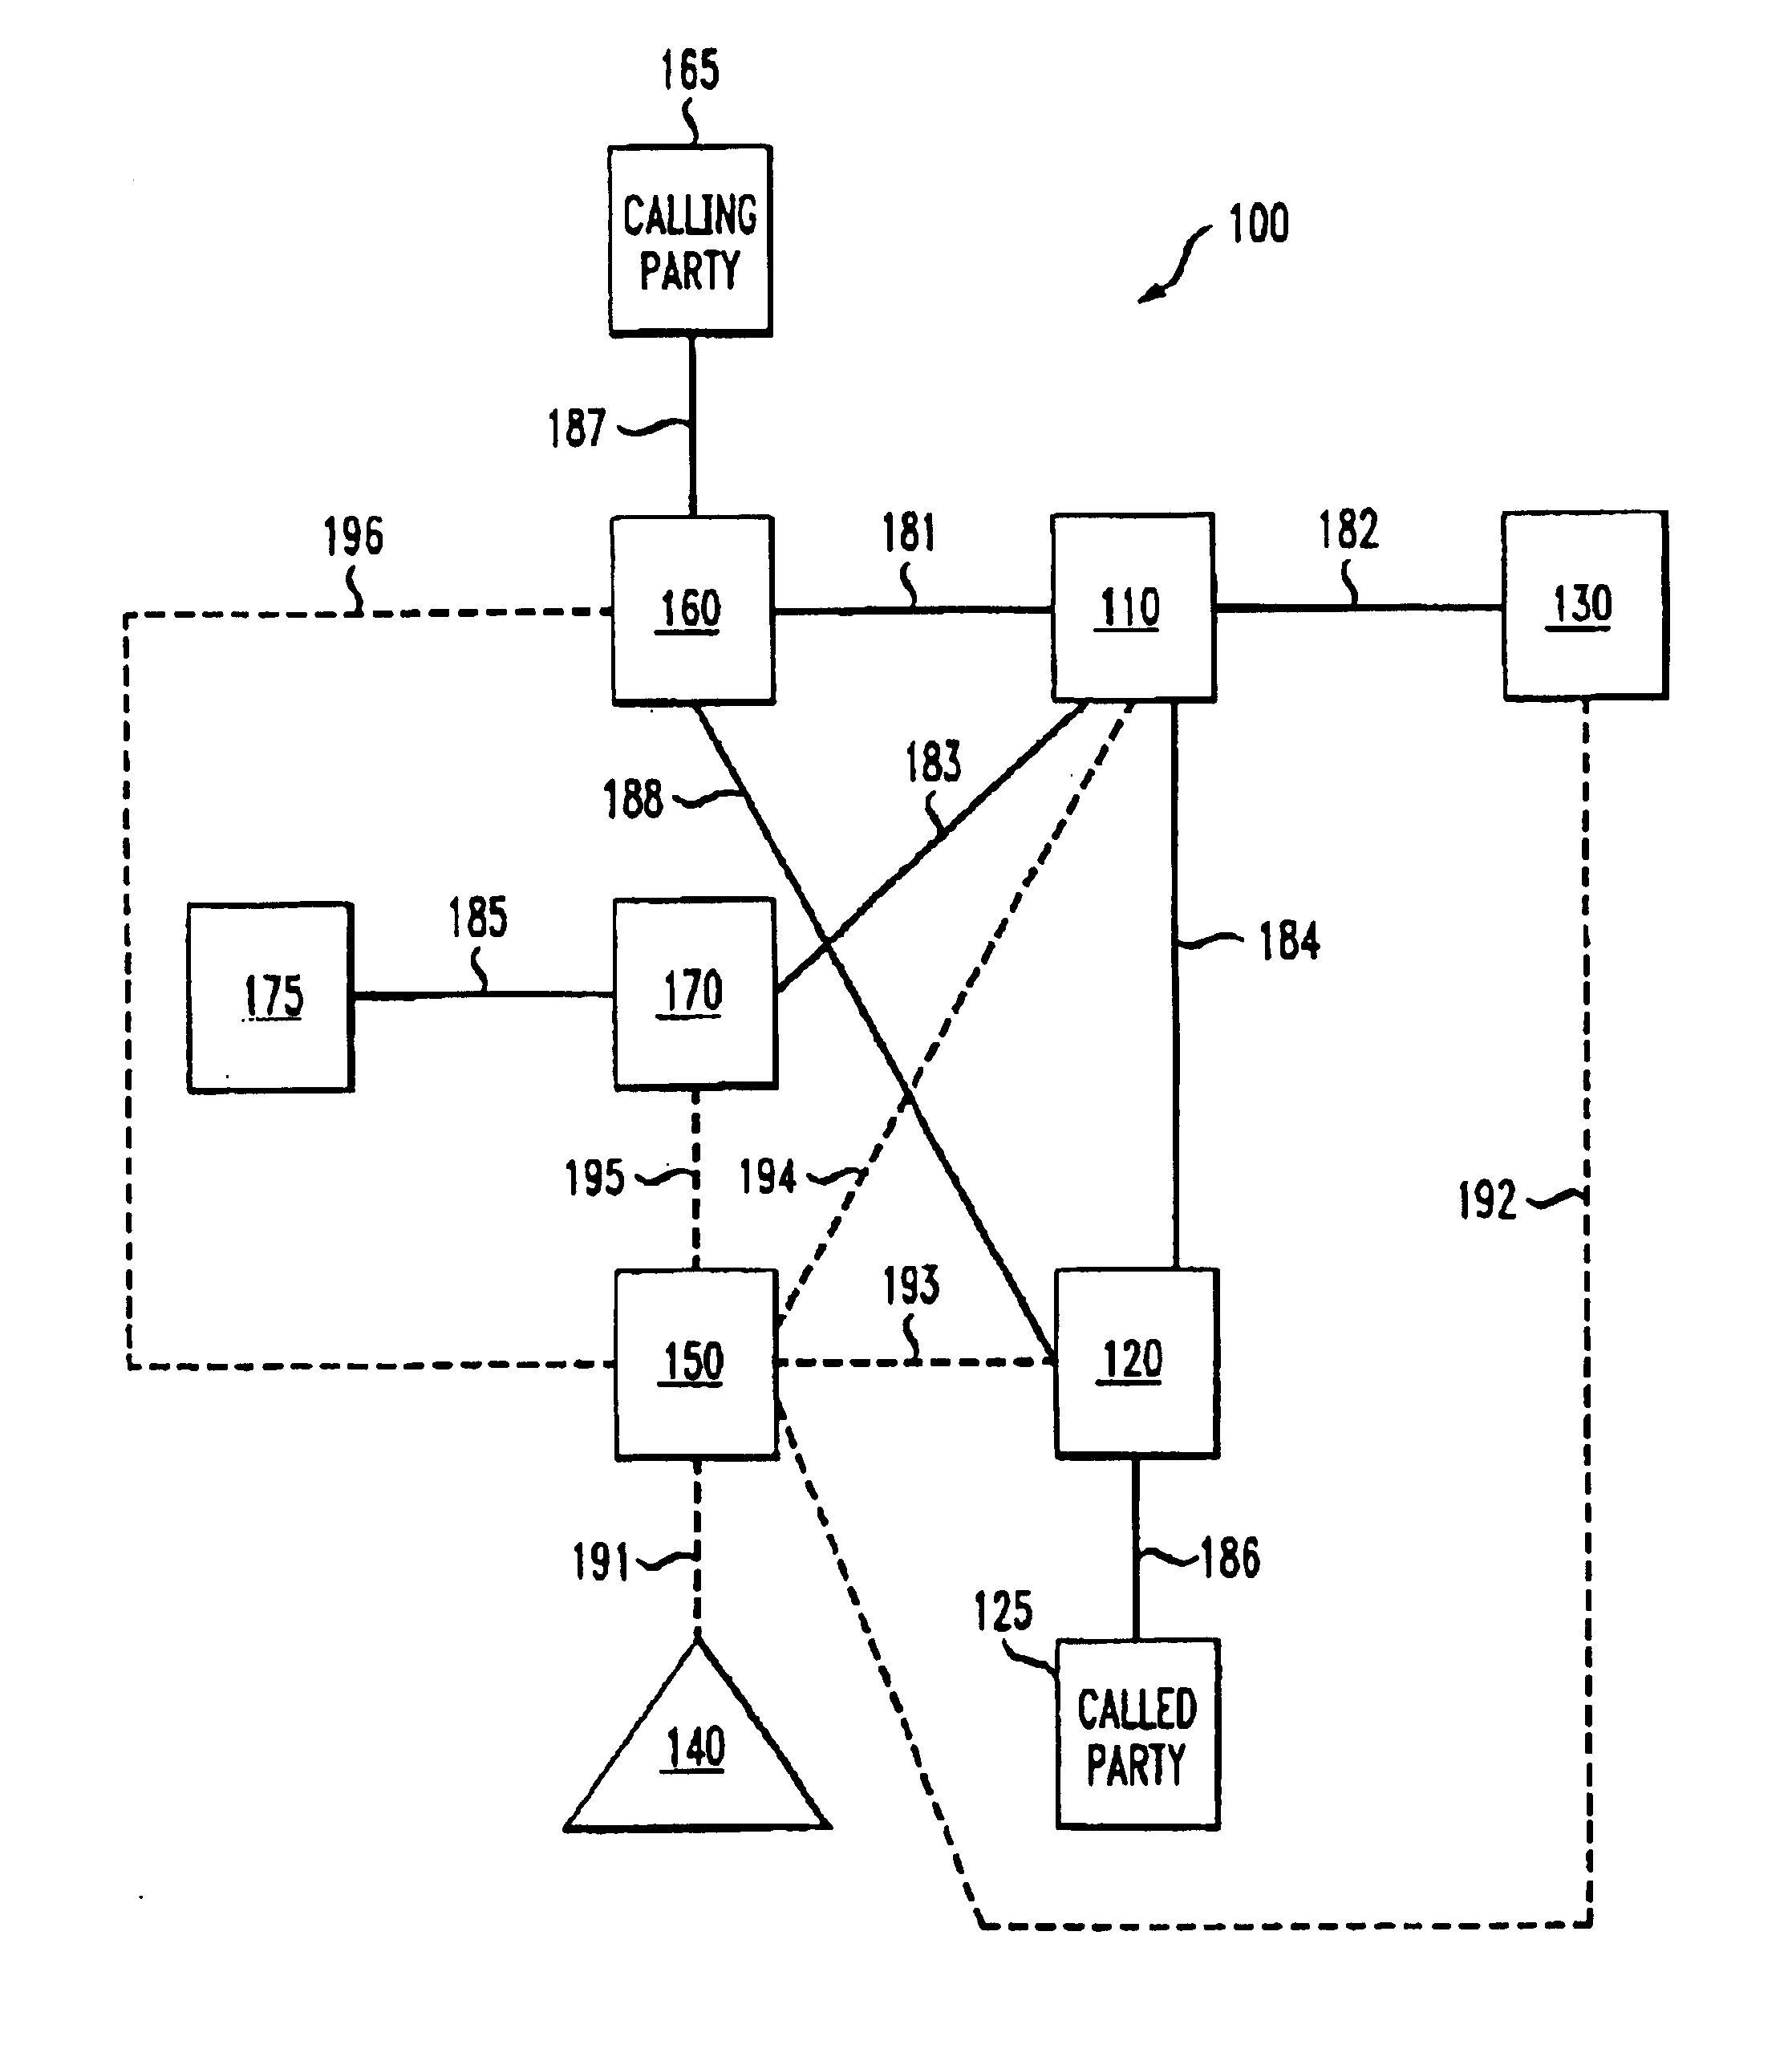 System and method of billing a predetermined telephone line for service utilized by a calling party